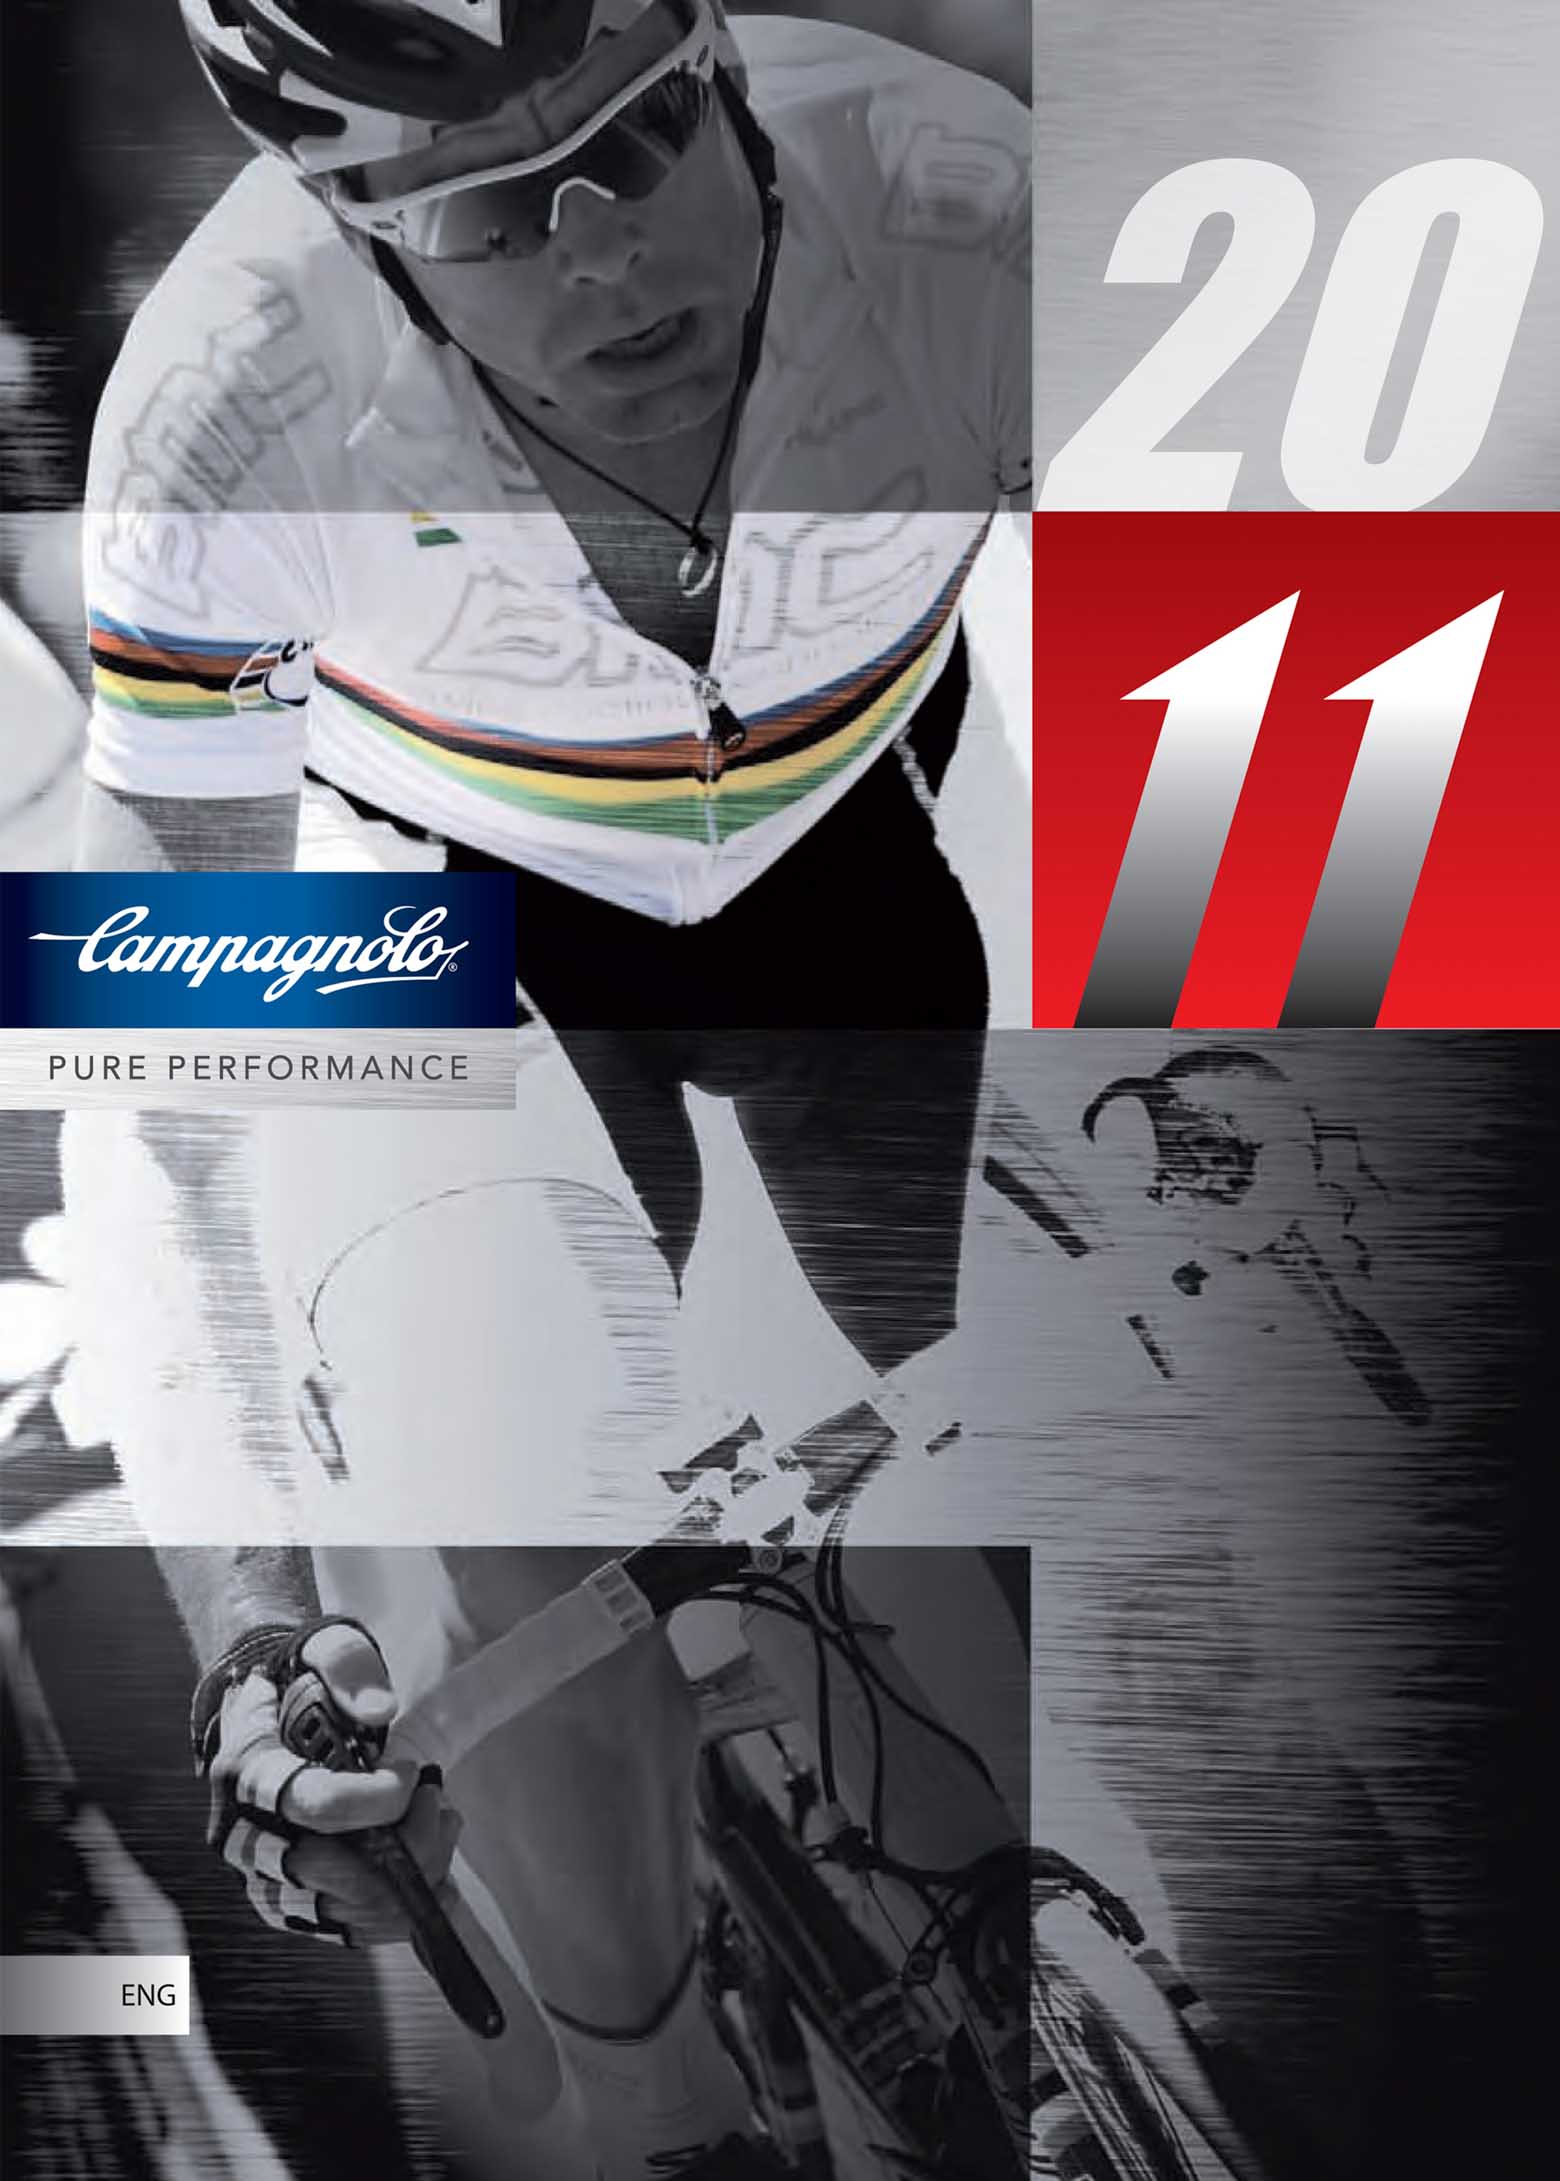 Campagnolo - 2011 front cover main image